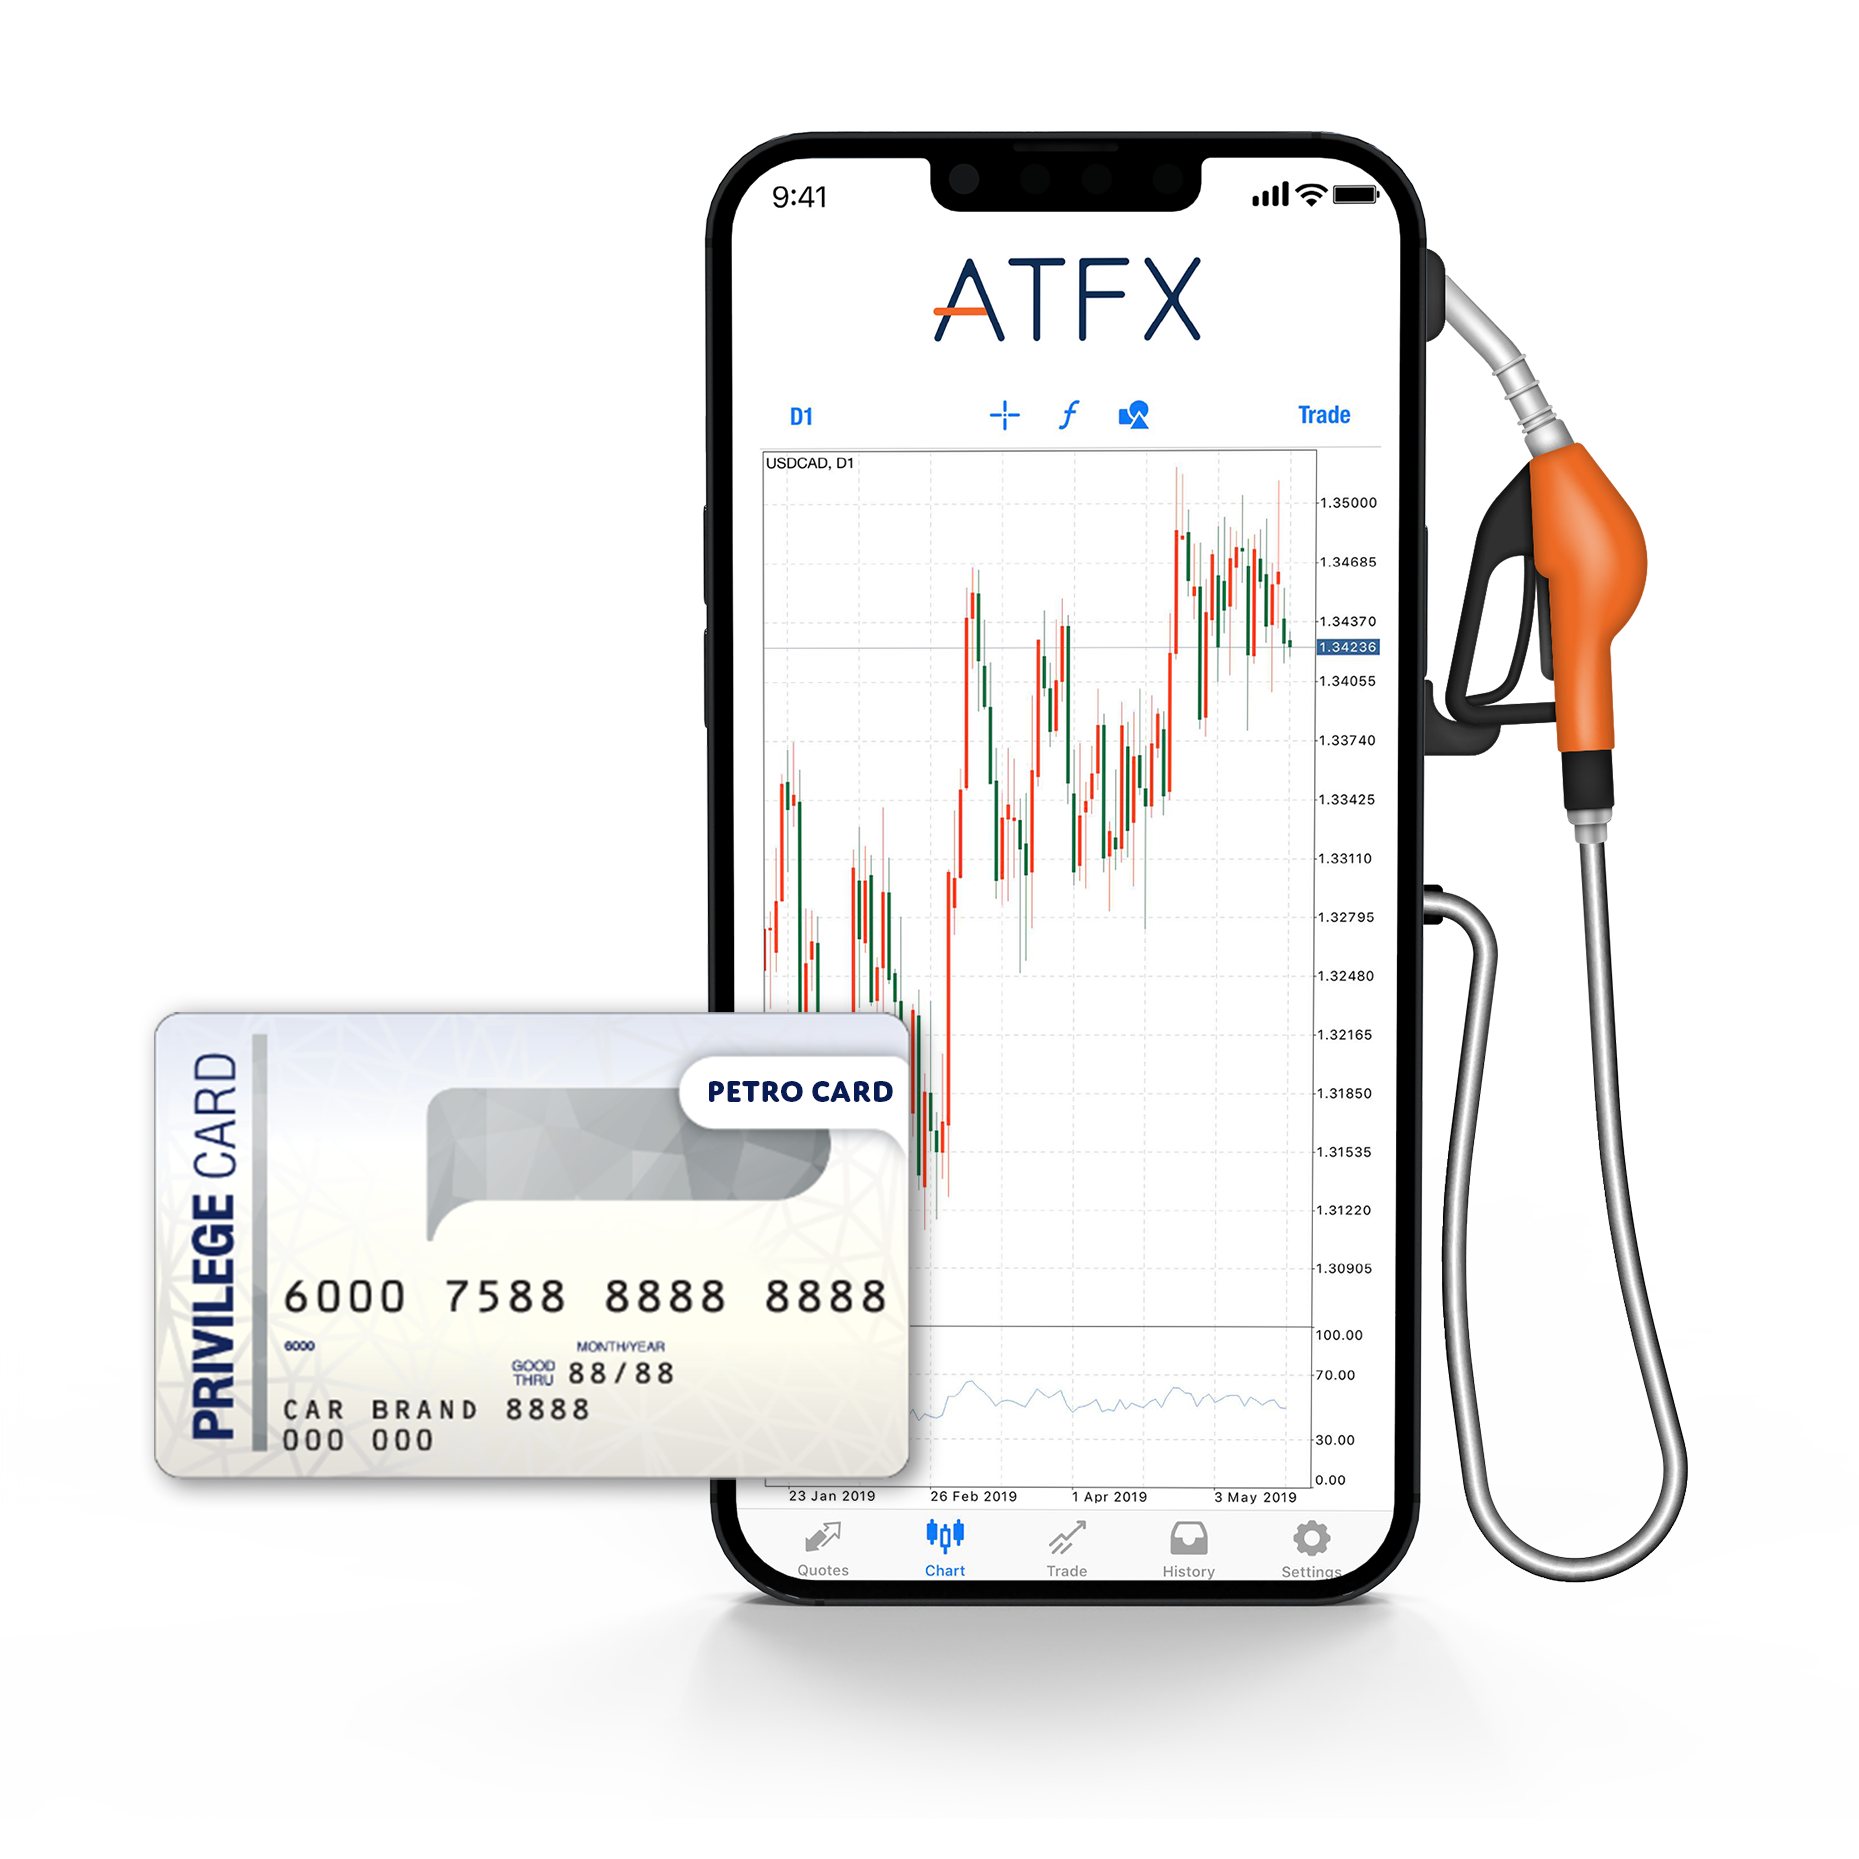 24_01-03_ATFX_TH_Promotion_Petro_Card_Banner_Phone_LP